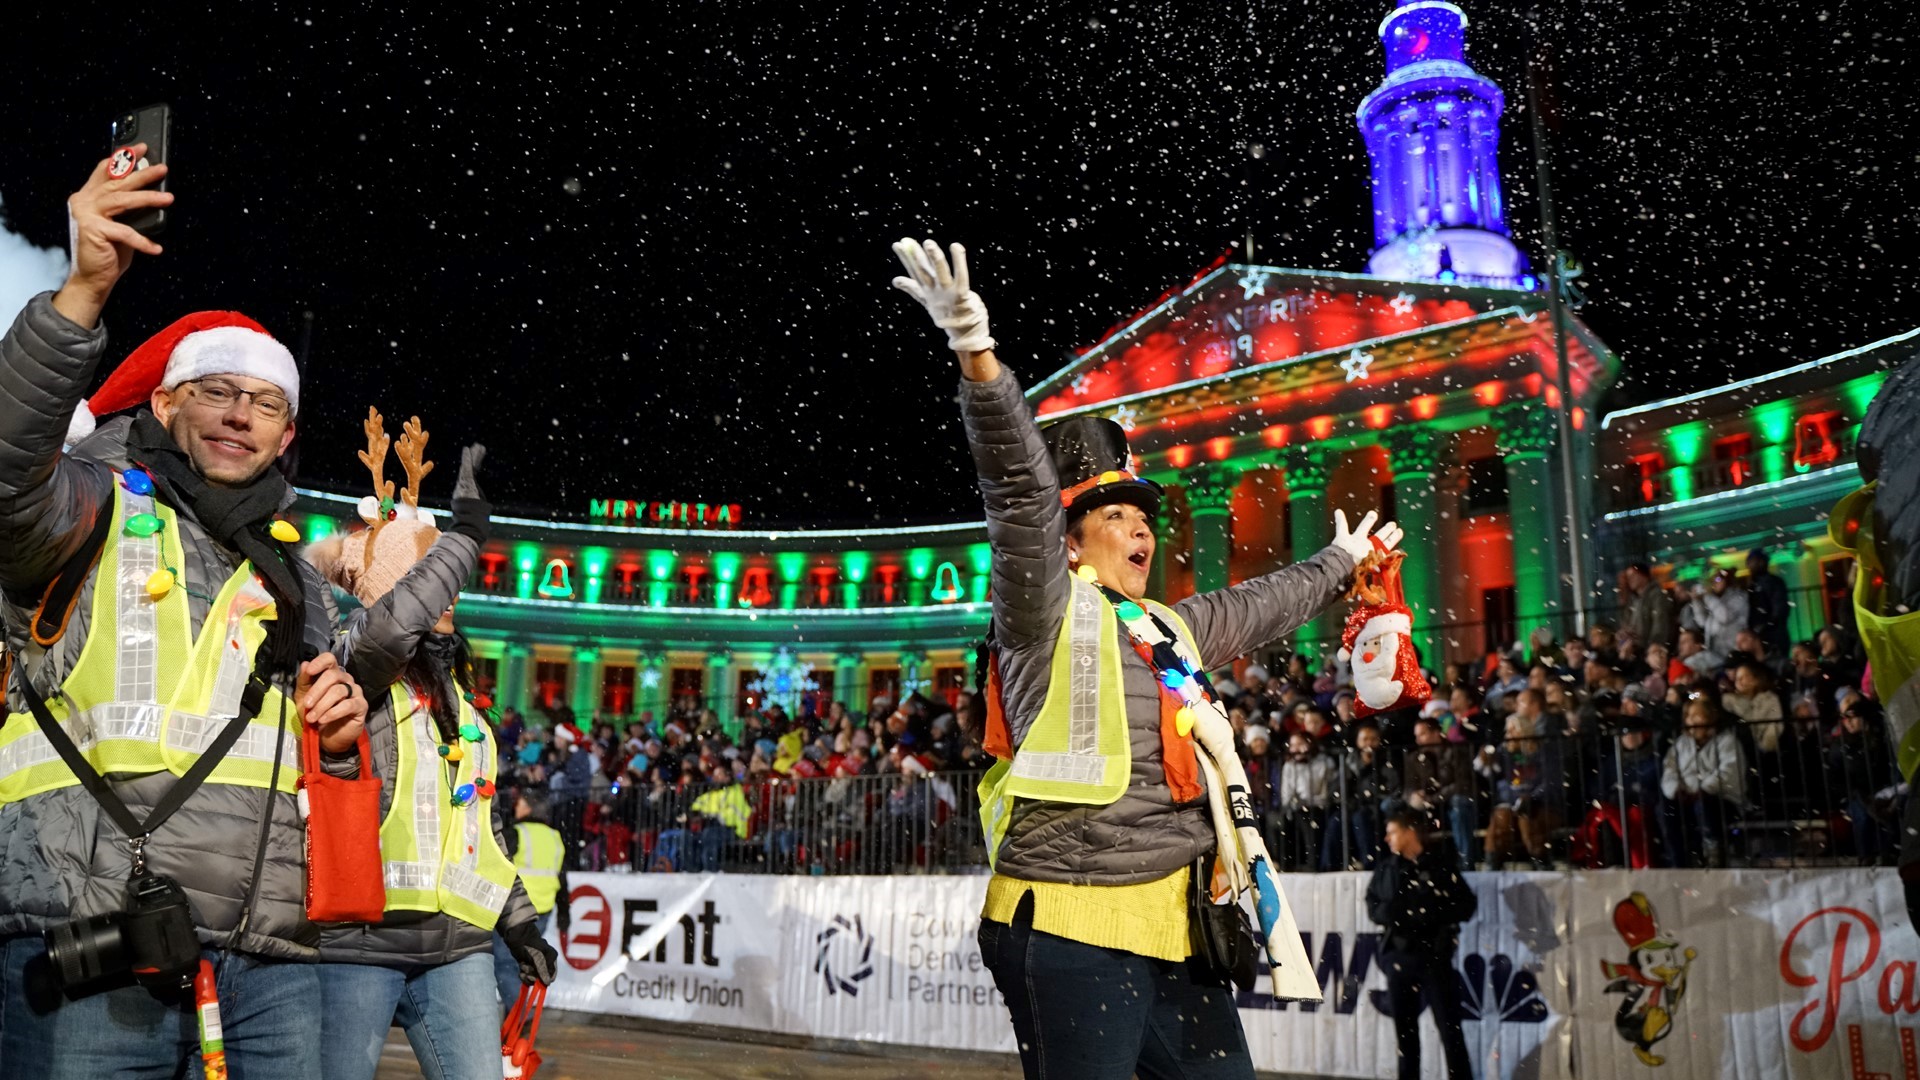 Watch as the 45th annual 9NEWS Parade of Lights 2019 brings sparkling lights, marching bands, giant balloons and colorful floats to the streets of downtown Denver.